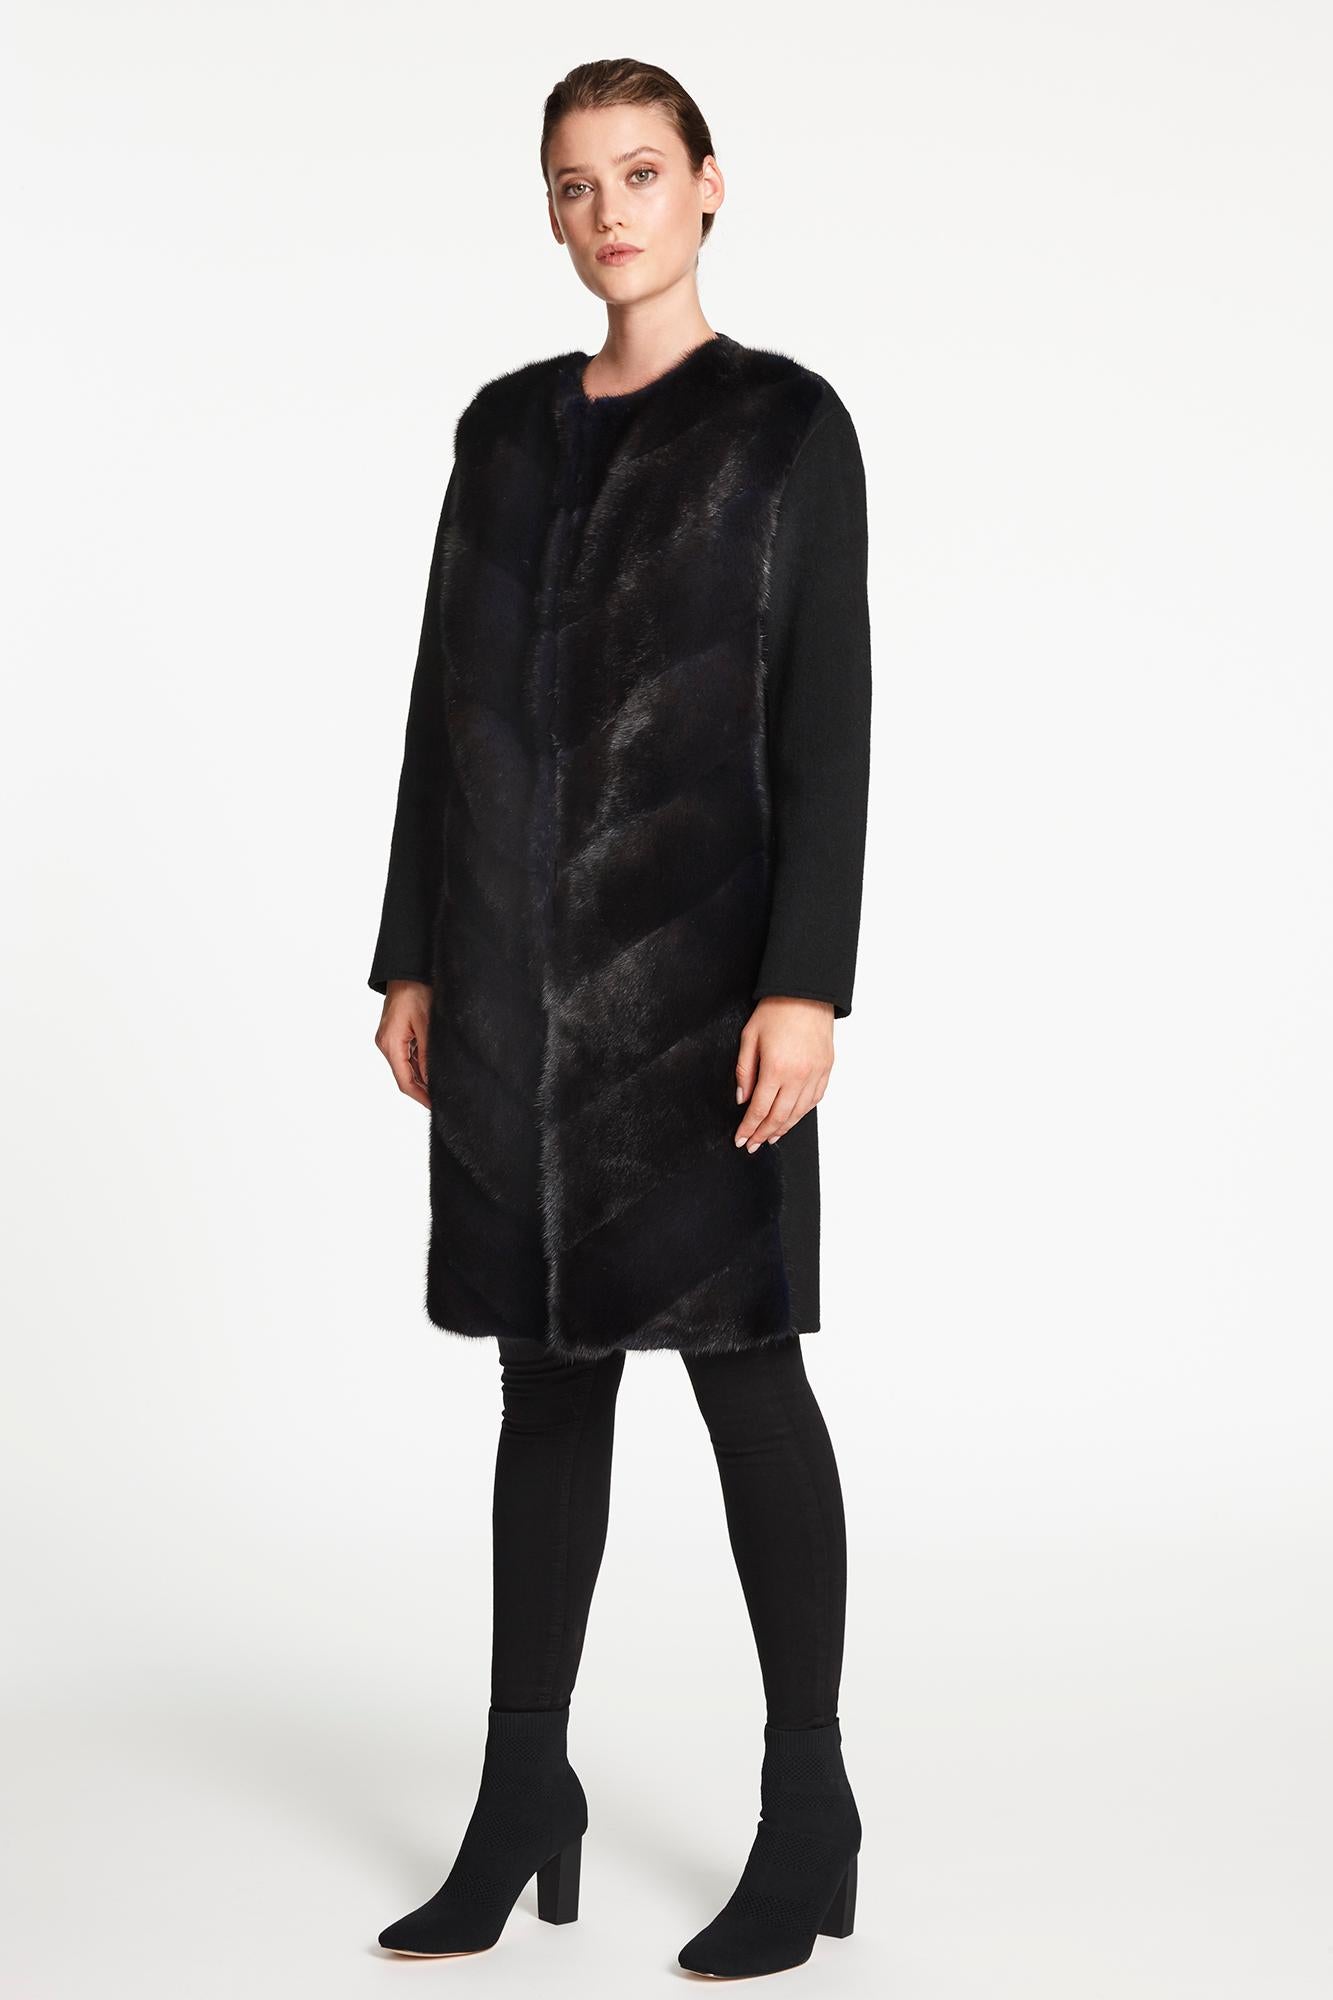 Brand New Collarless Coat Cashmere and in Navy Black Mink Fur 3